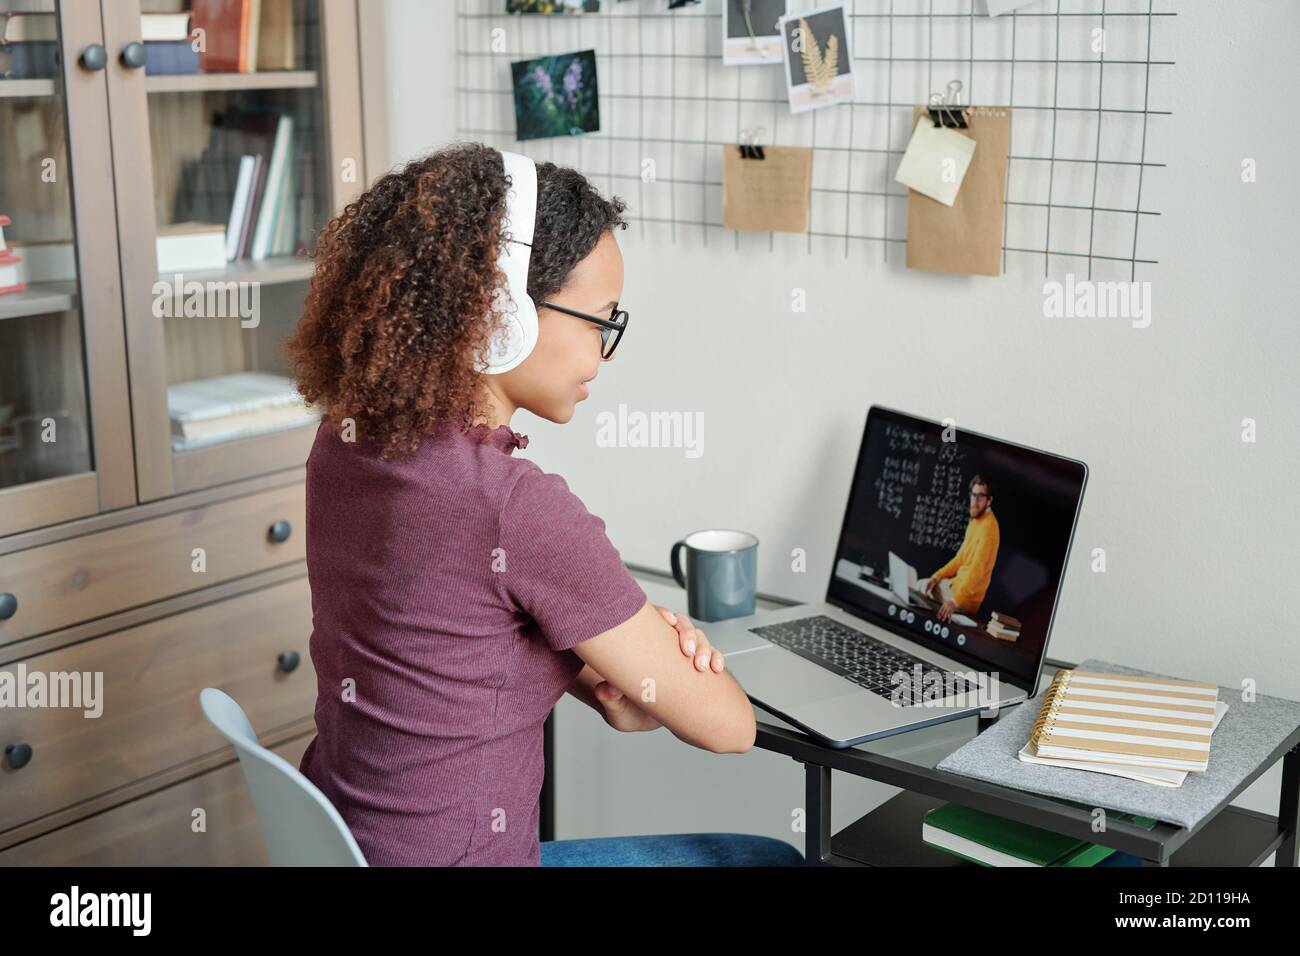 Young mixed-race diligent student having online lesson in home environment Stock Photo